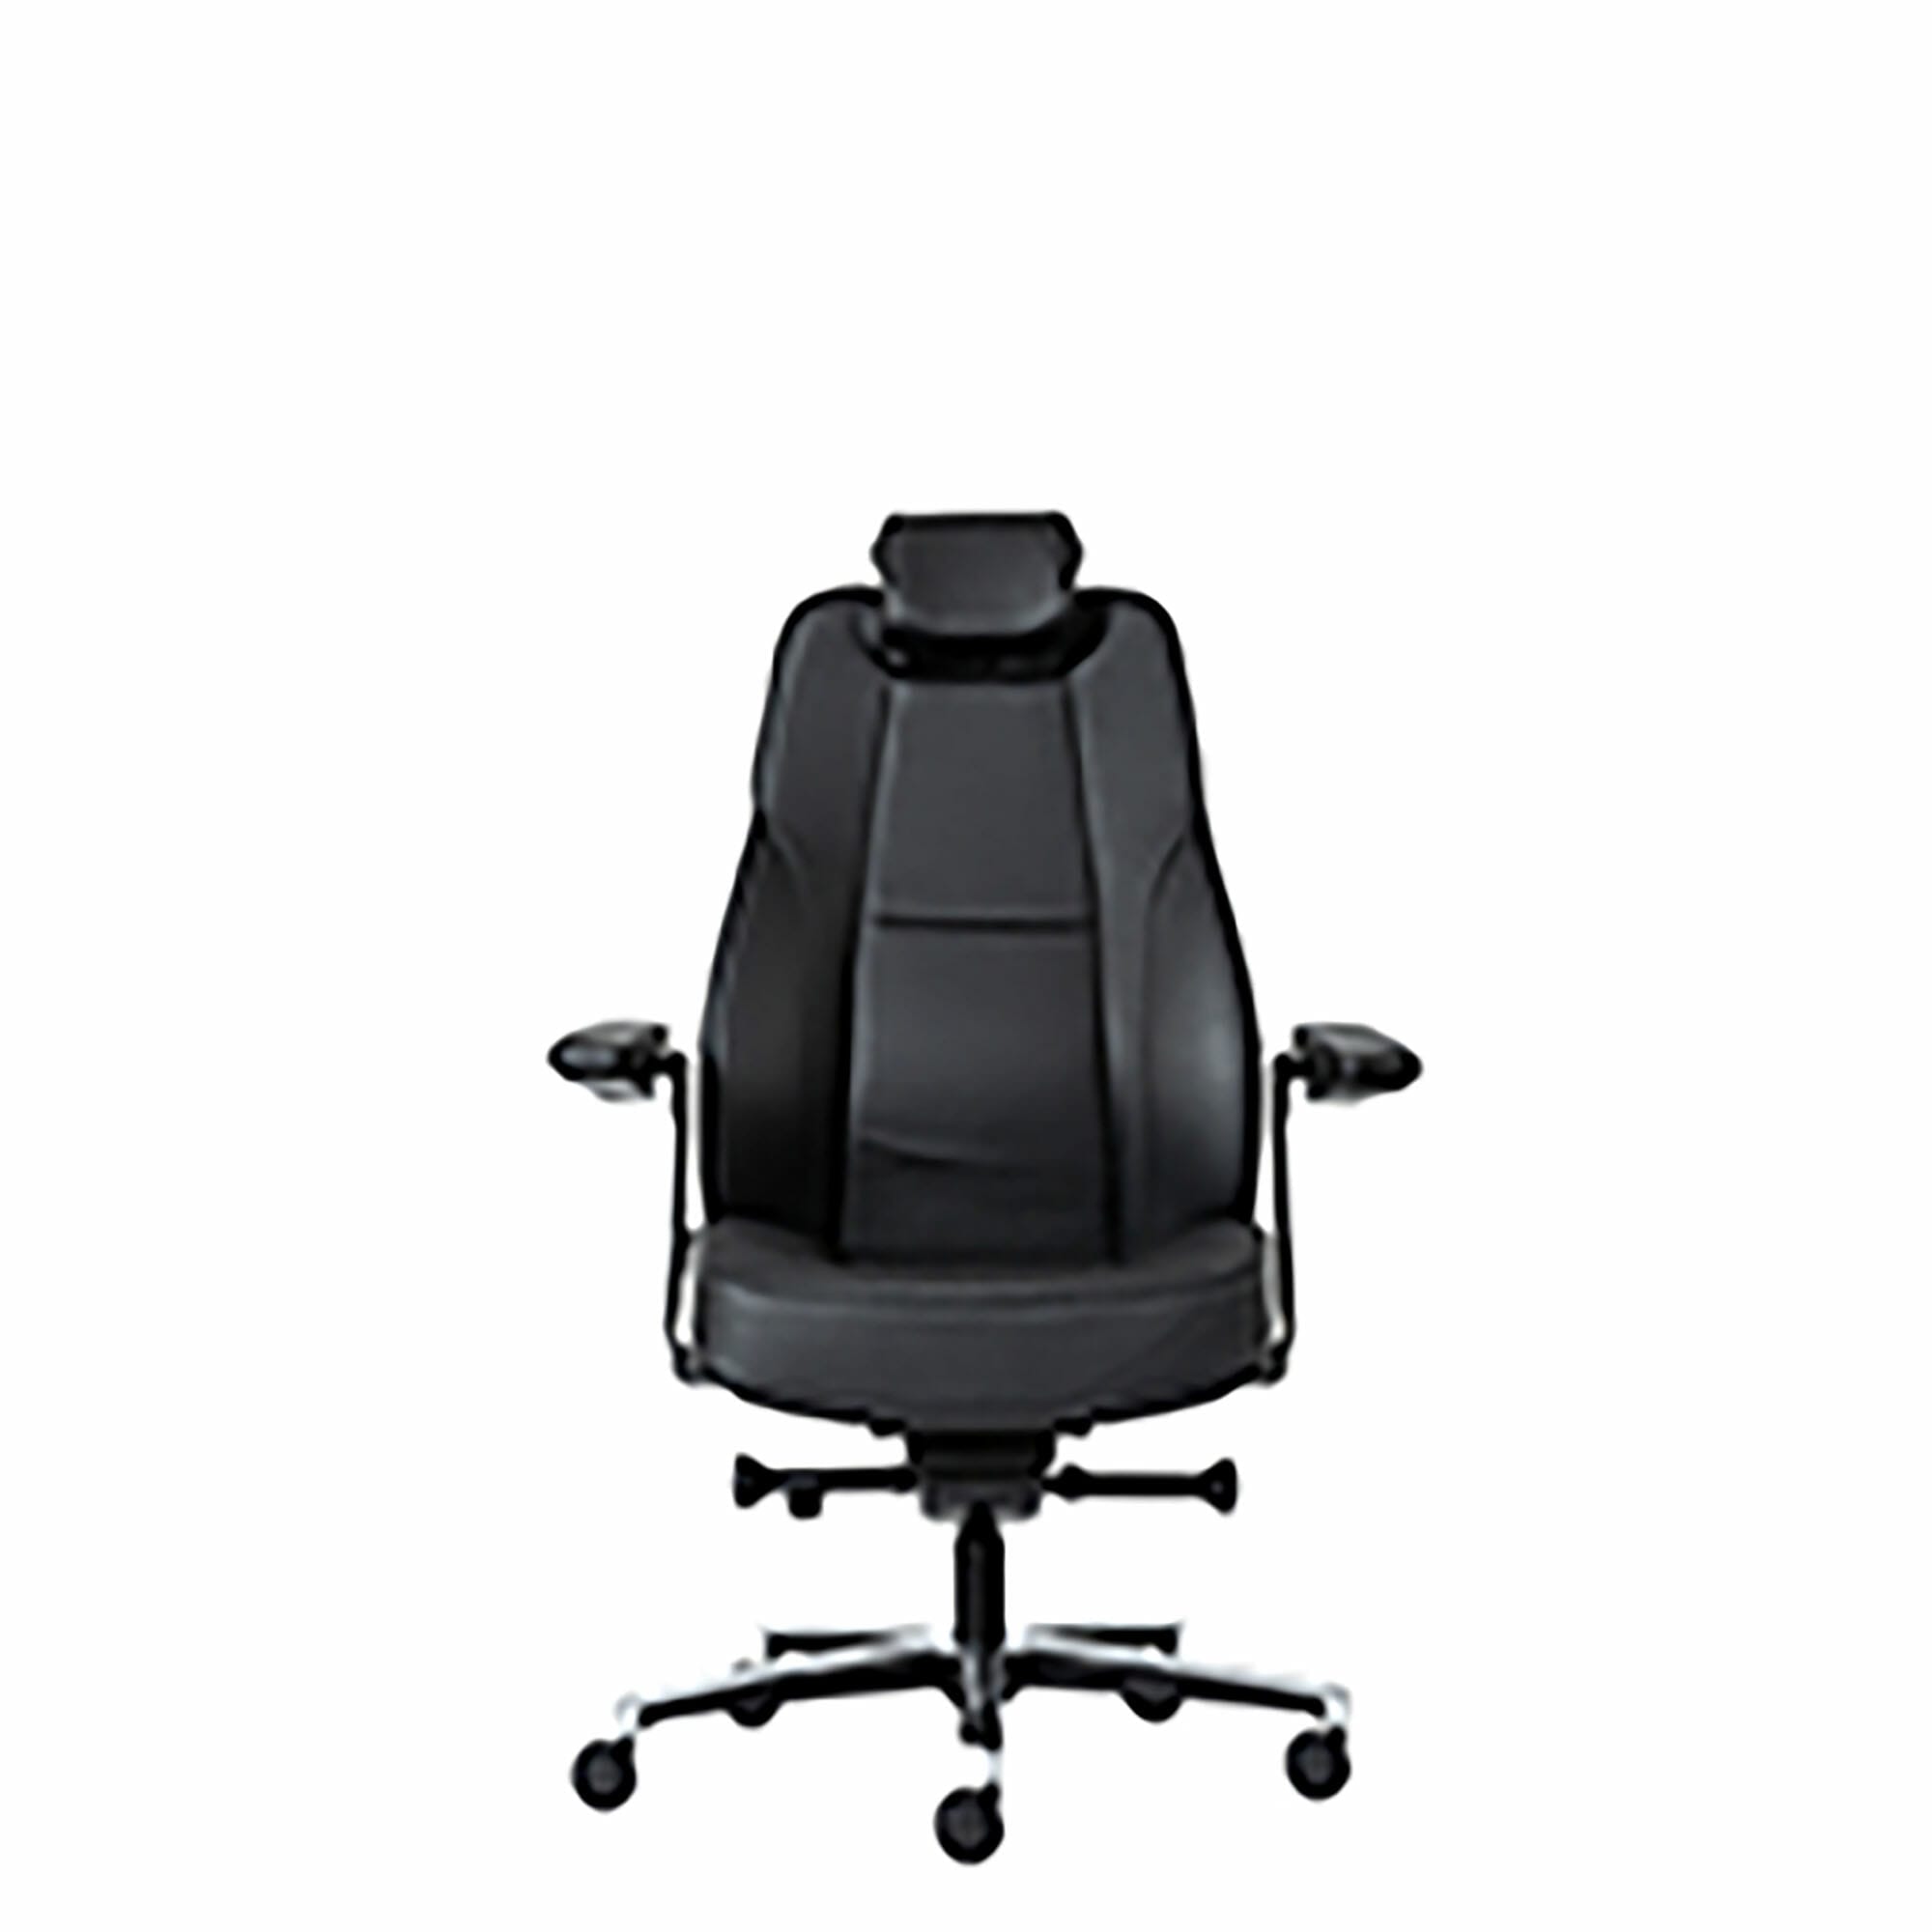 Buro Maverick controller 247 chair in leather front view